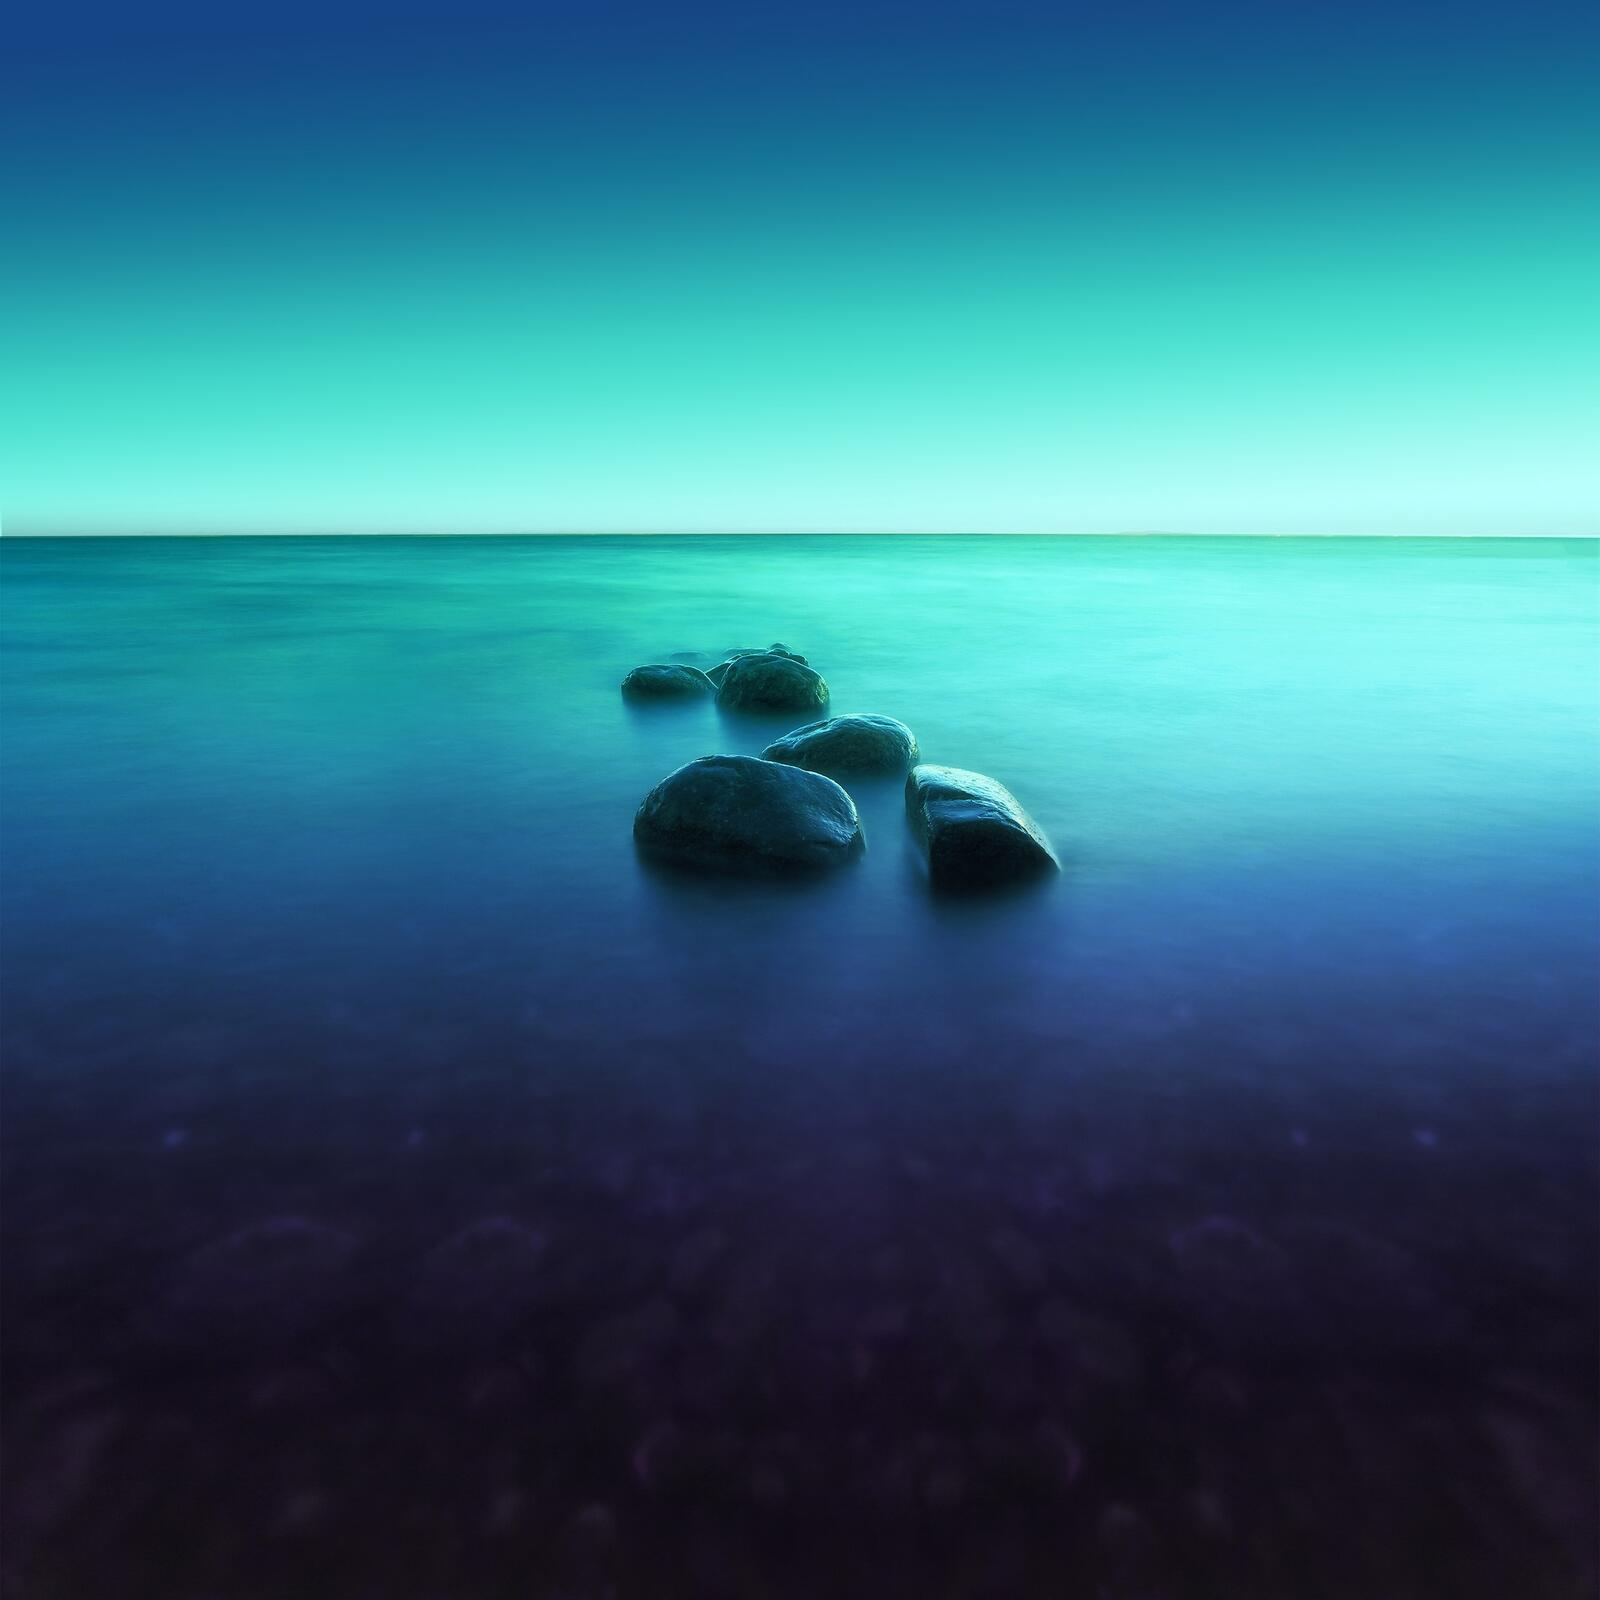 Wallpapers reflection stones blue on the desktop